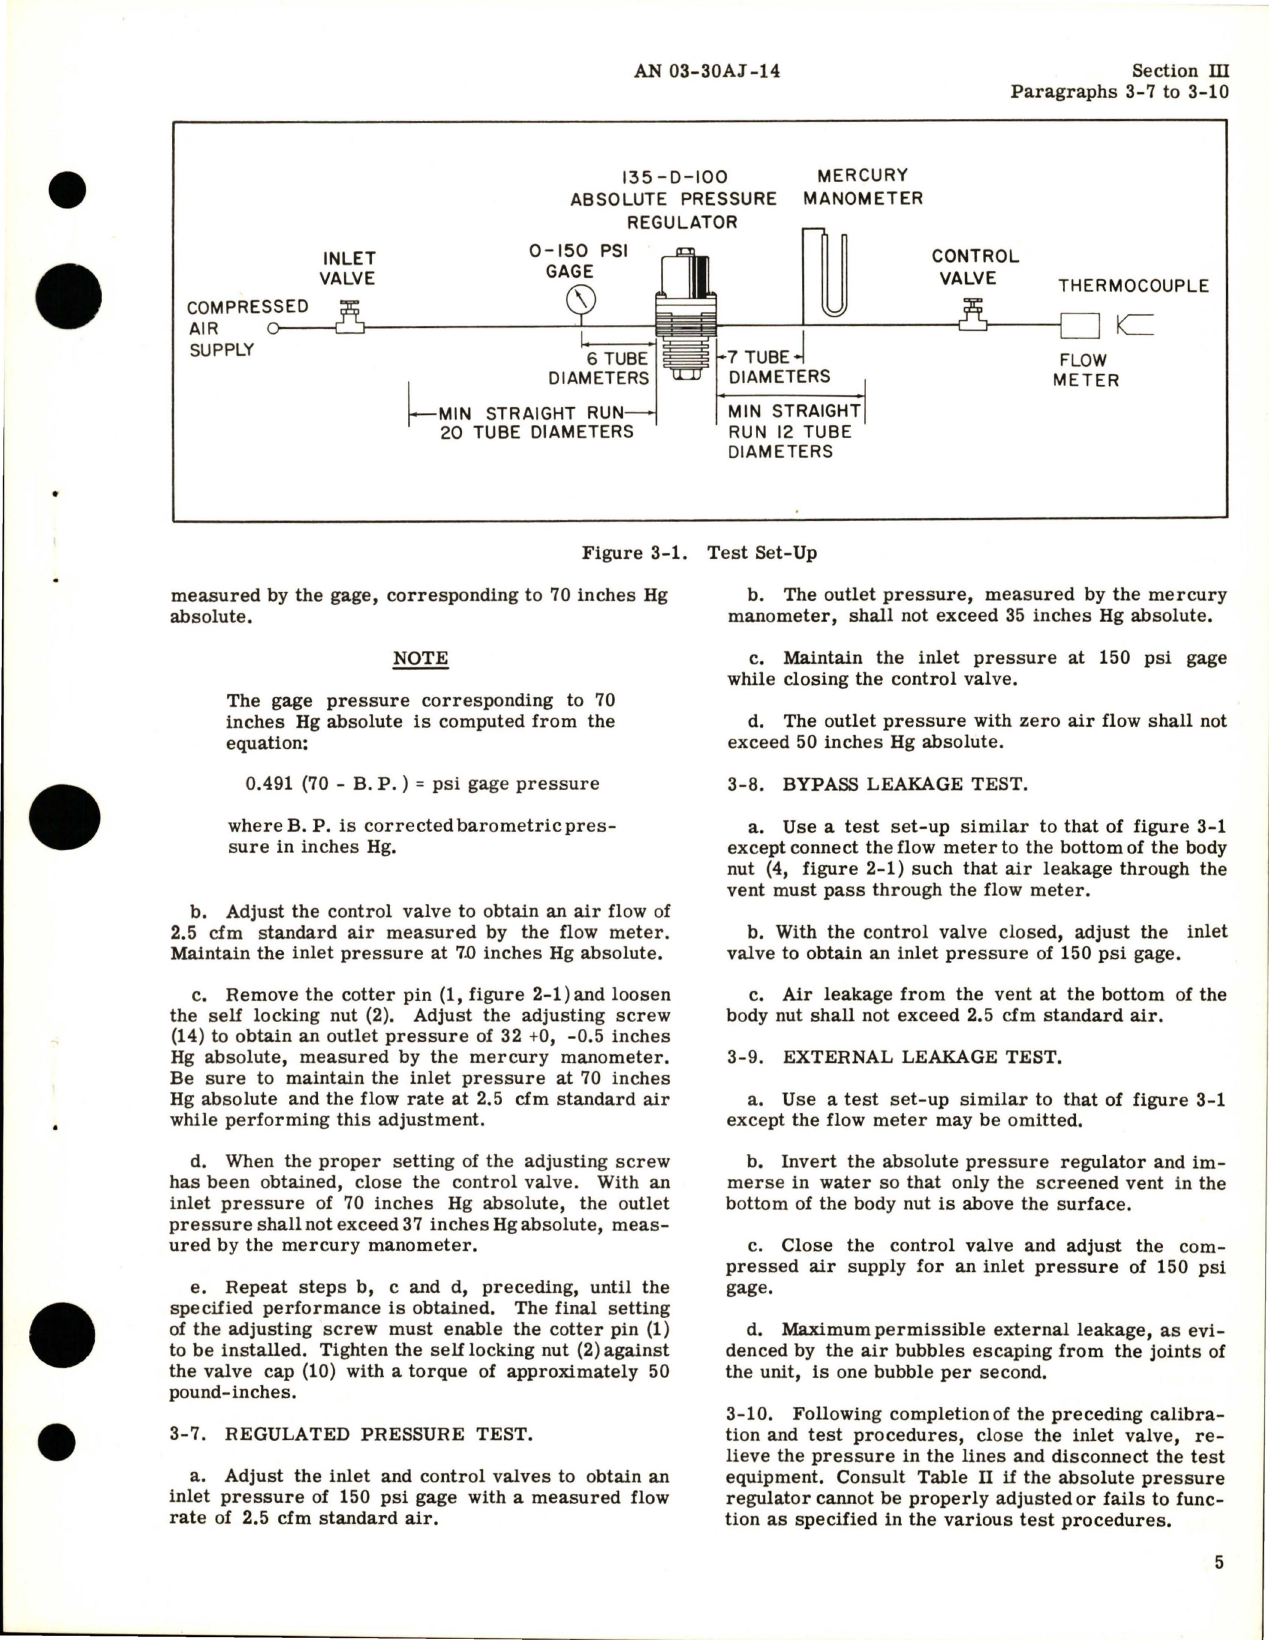 Sample page 7 from AirCorps Library document: Overhaul Instructions for Absolute Pressure Regulator - Models 135-D-100-1, 135-D-100-3, 135-D-100-4, and 135-D-100-5